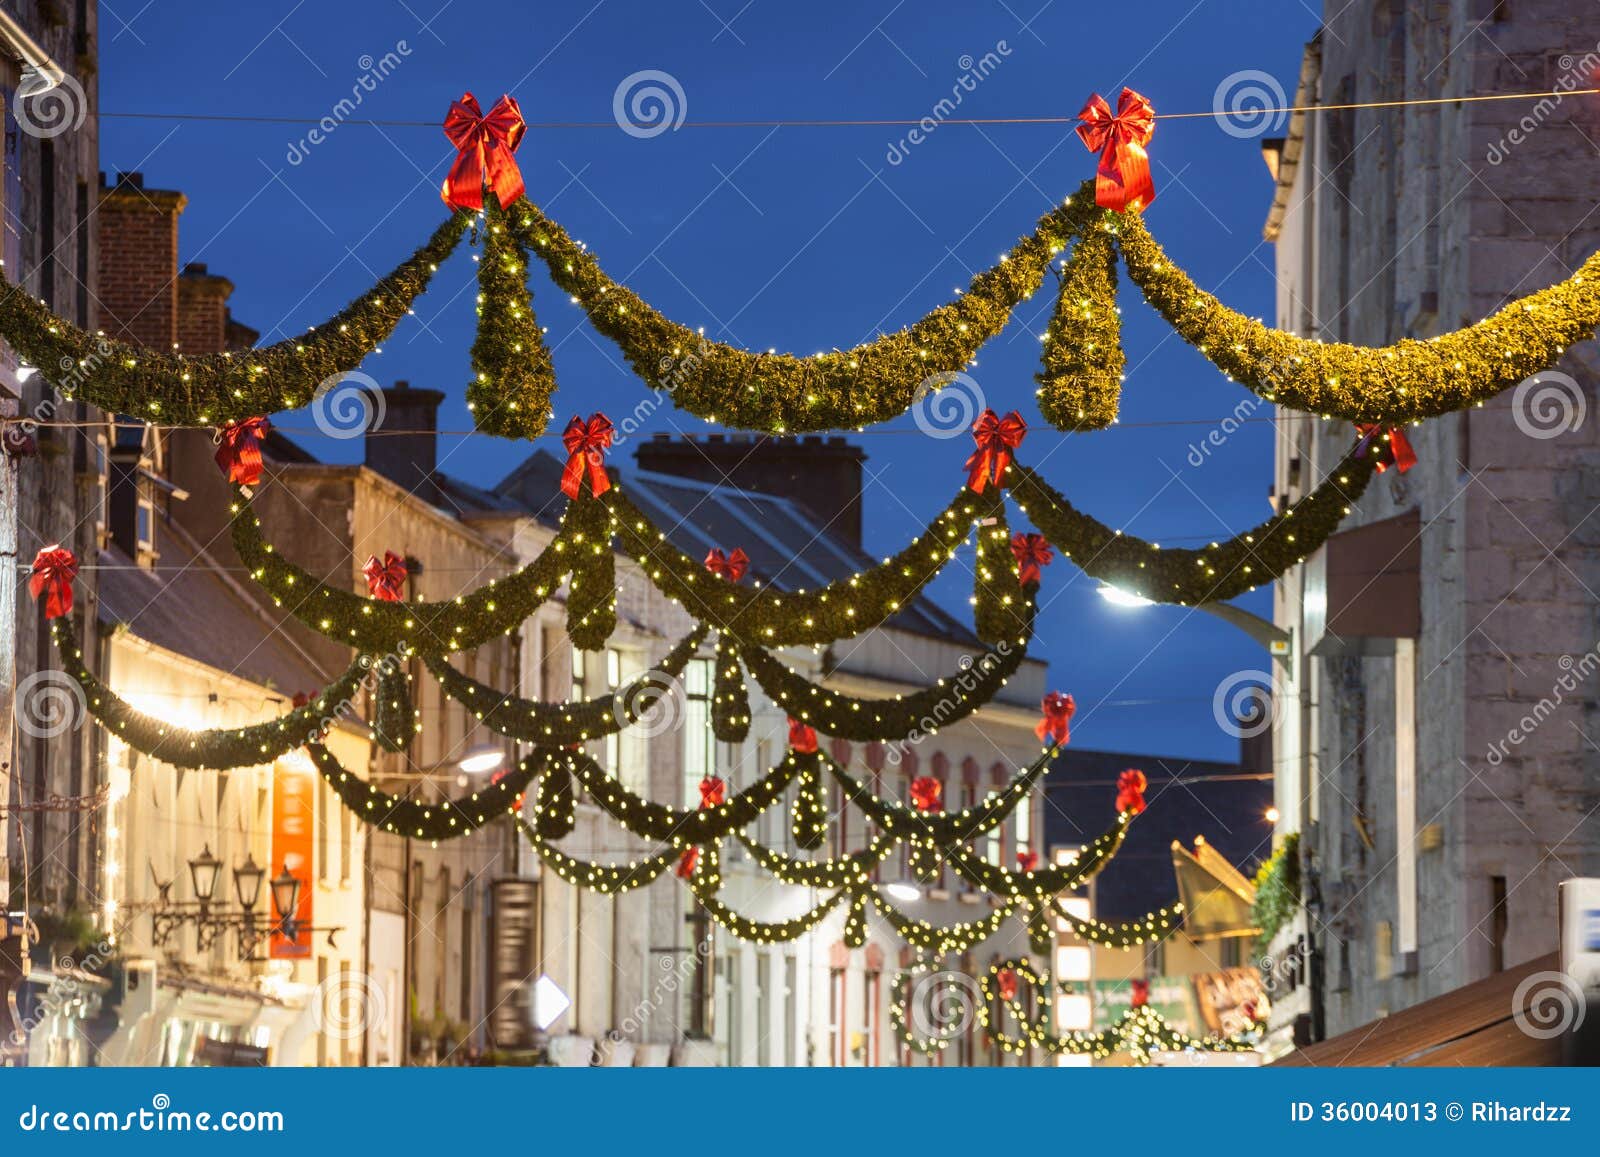 Shop Street At Night Galway Stock Image Image of people 